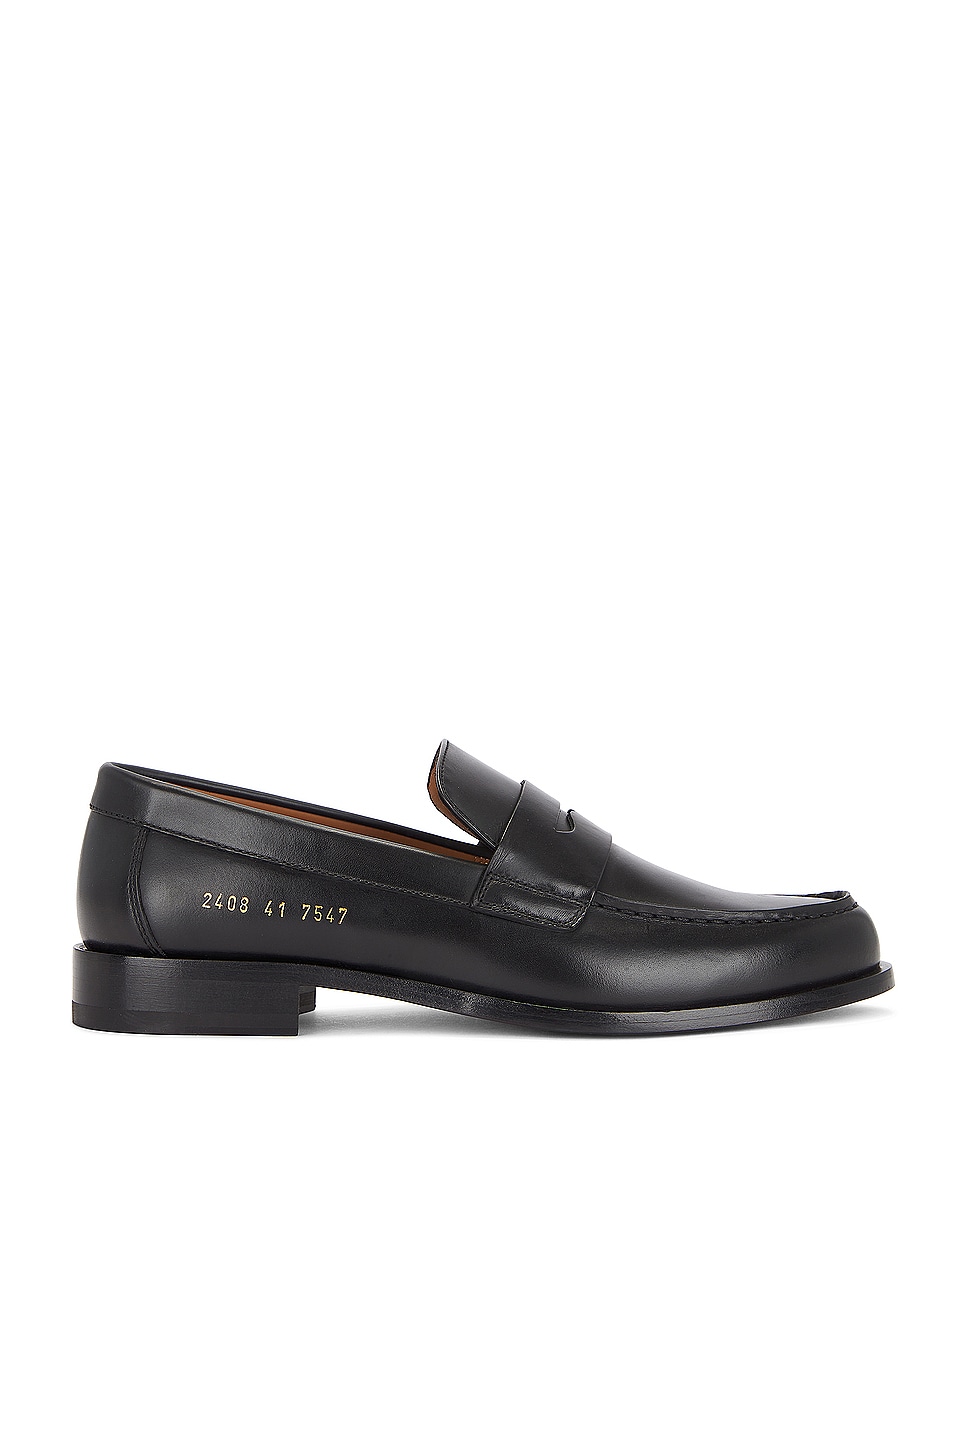 Image 1 of Common Projects Loafer in Black